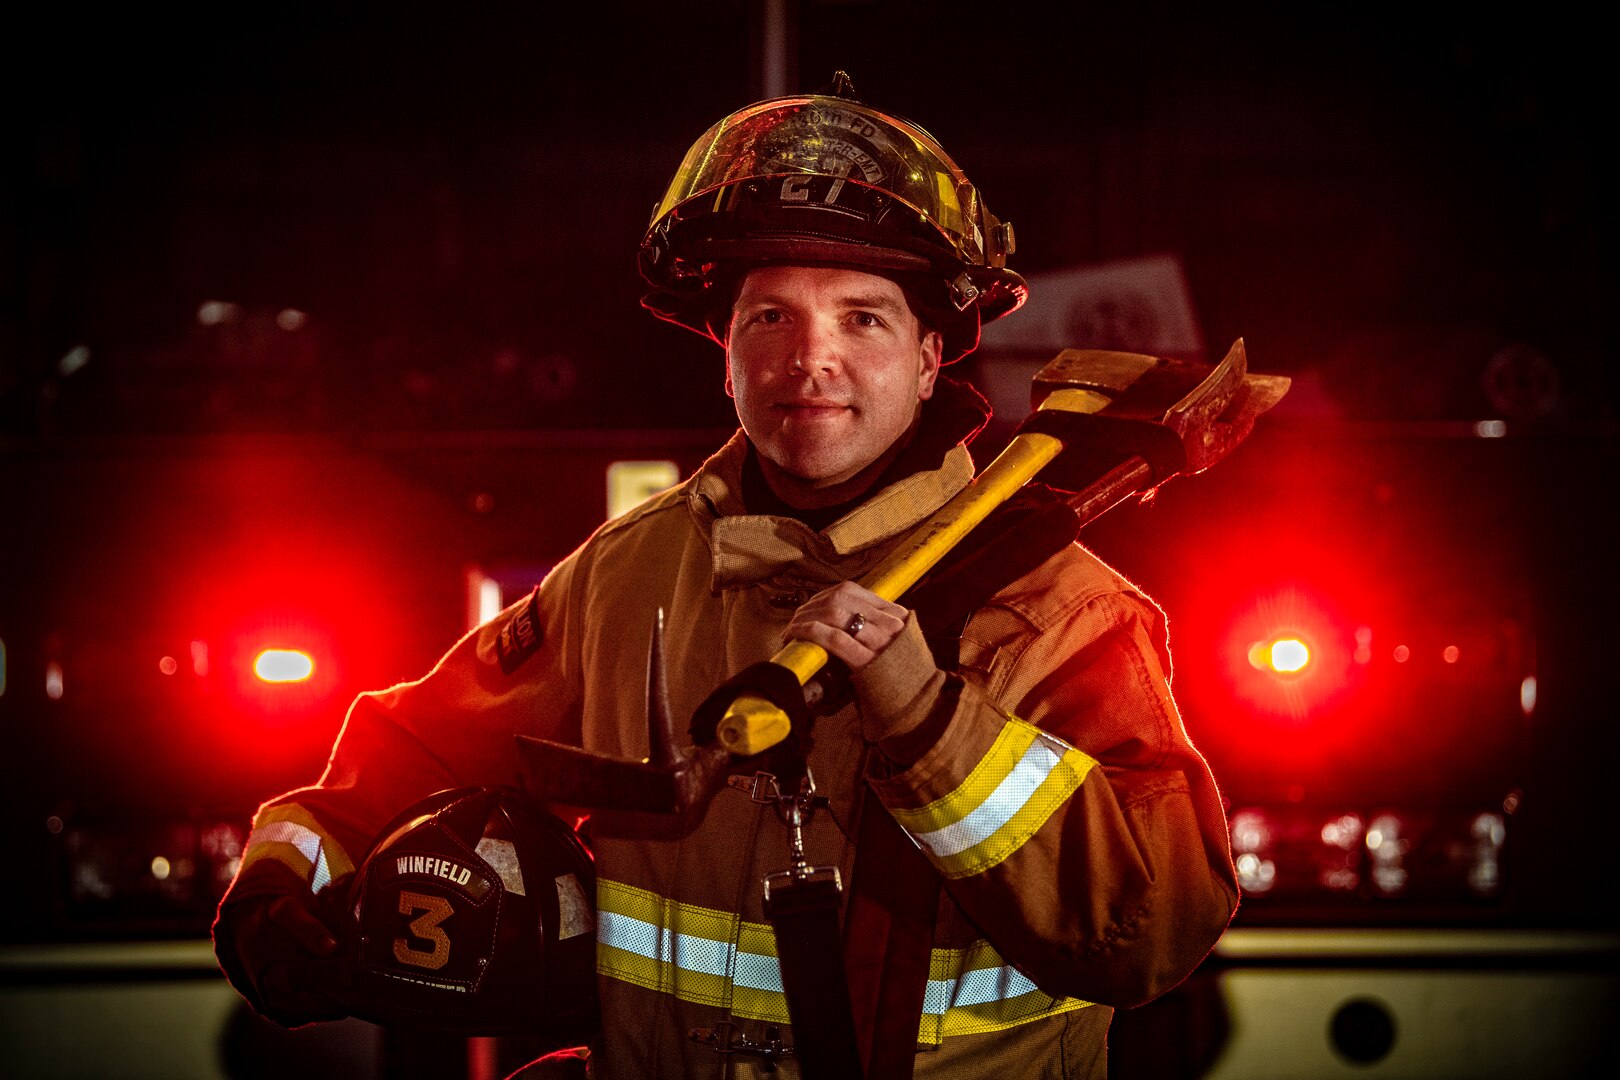 Senior Airman Nate Arthur, a fire protection craftsman assigned to the 130th Fire and Emergency Services, West Virginia Air National Guard, shown Jan. 14, 2020, at McLaughlin Air National Guard Base, Charleston, W.Va.